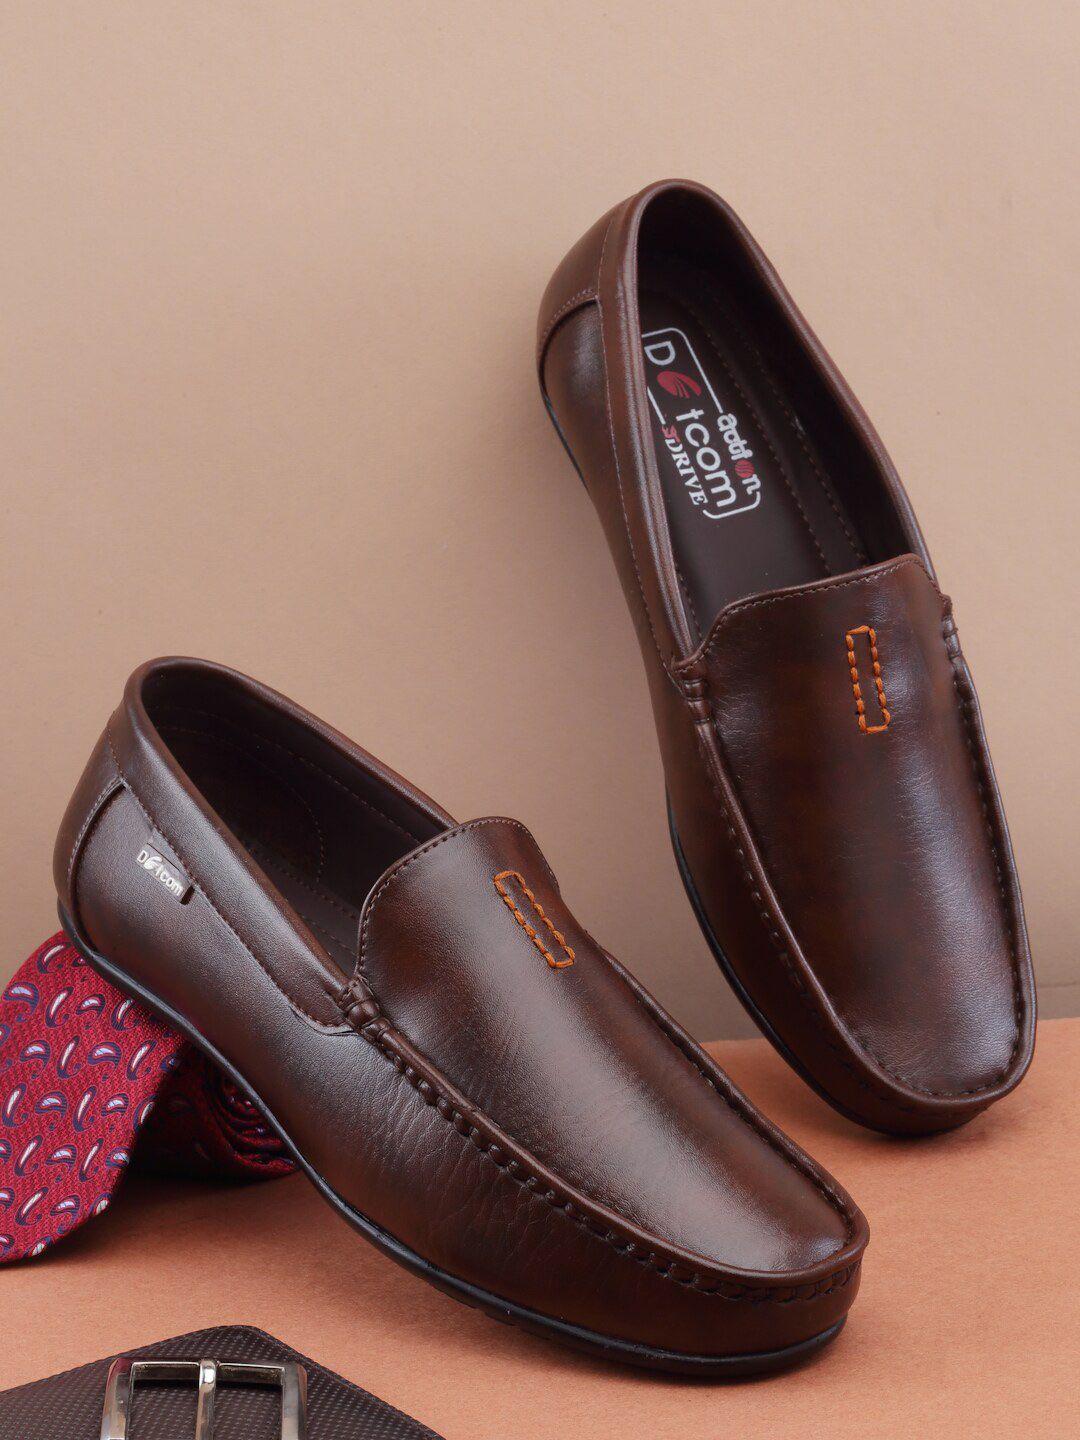 action-men-dotcom-drive-formal-loafers